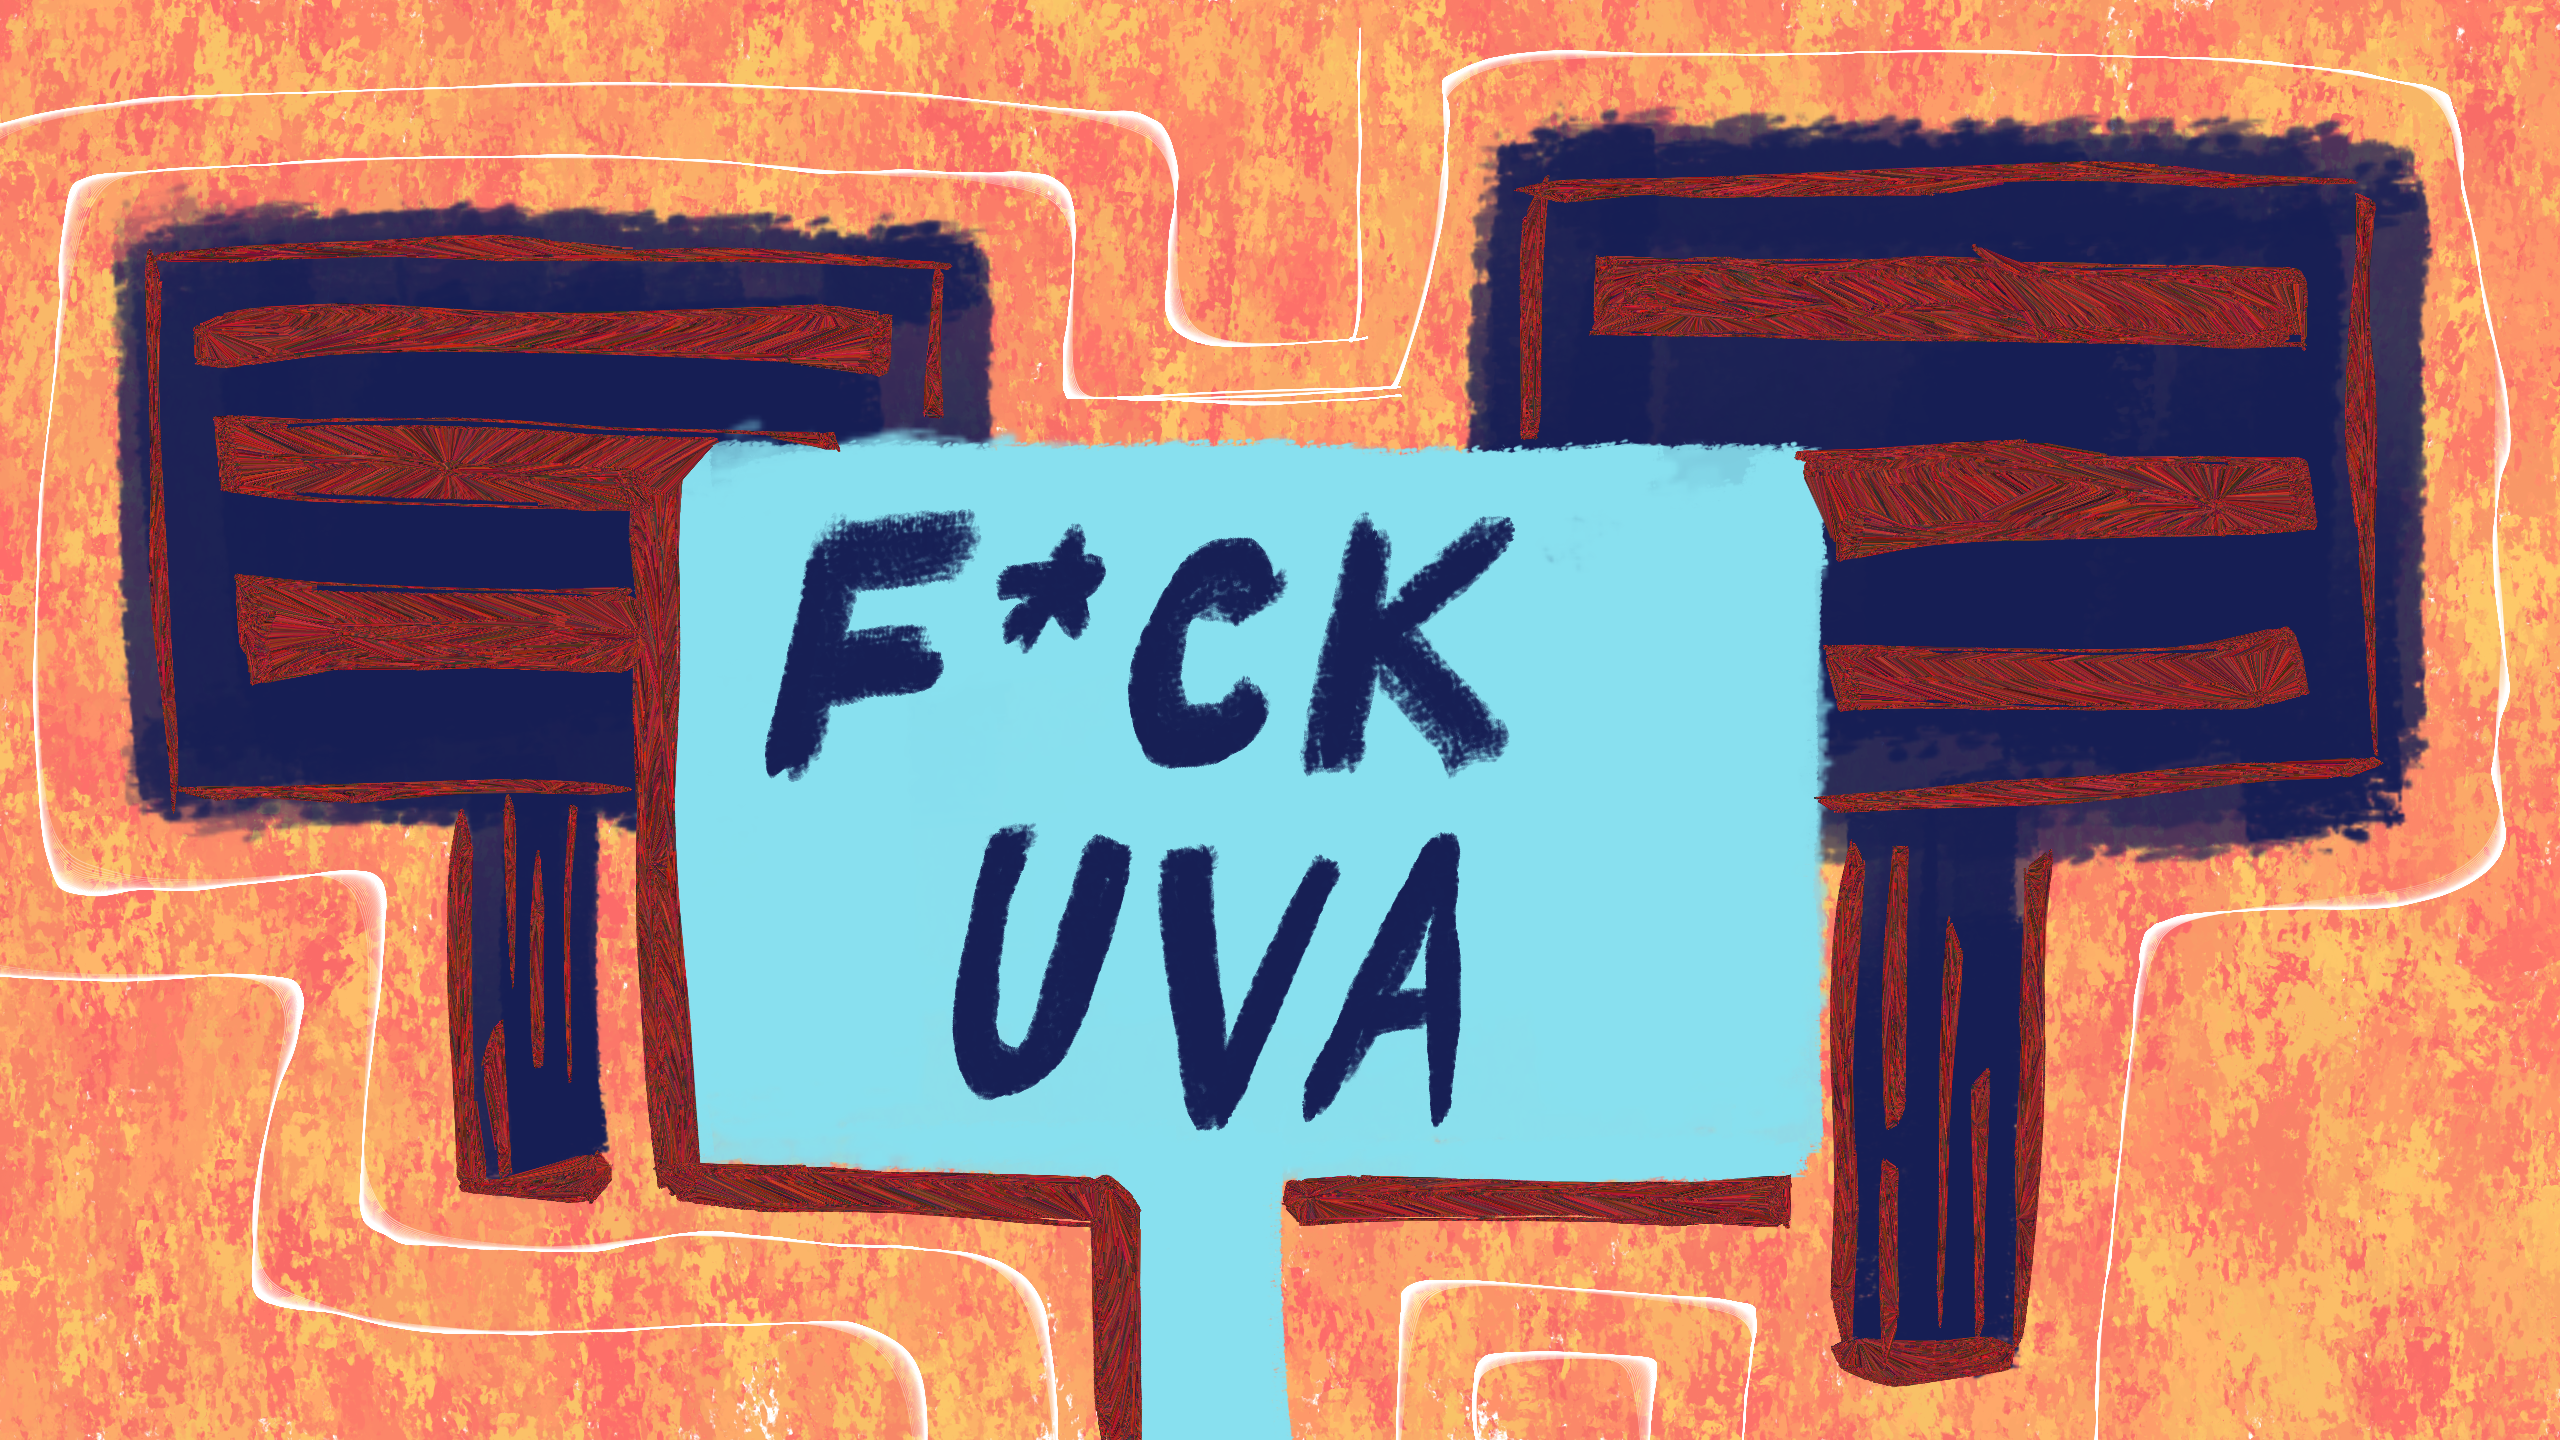 quote bubbles with one in the center that says "F*CK UVA"